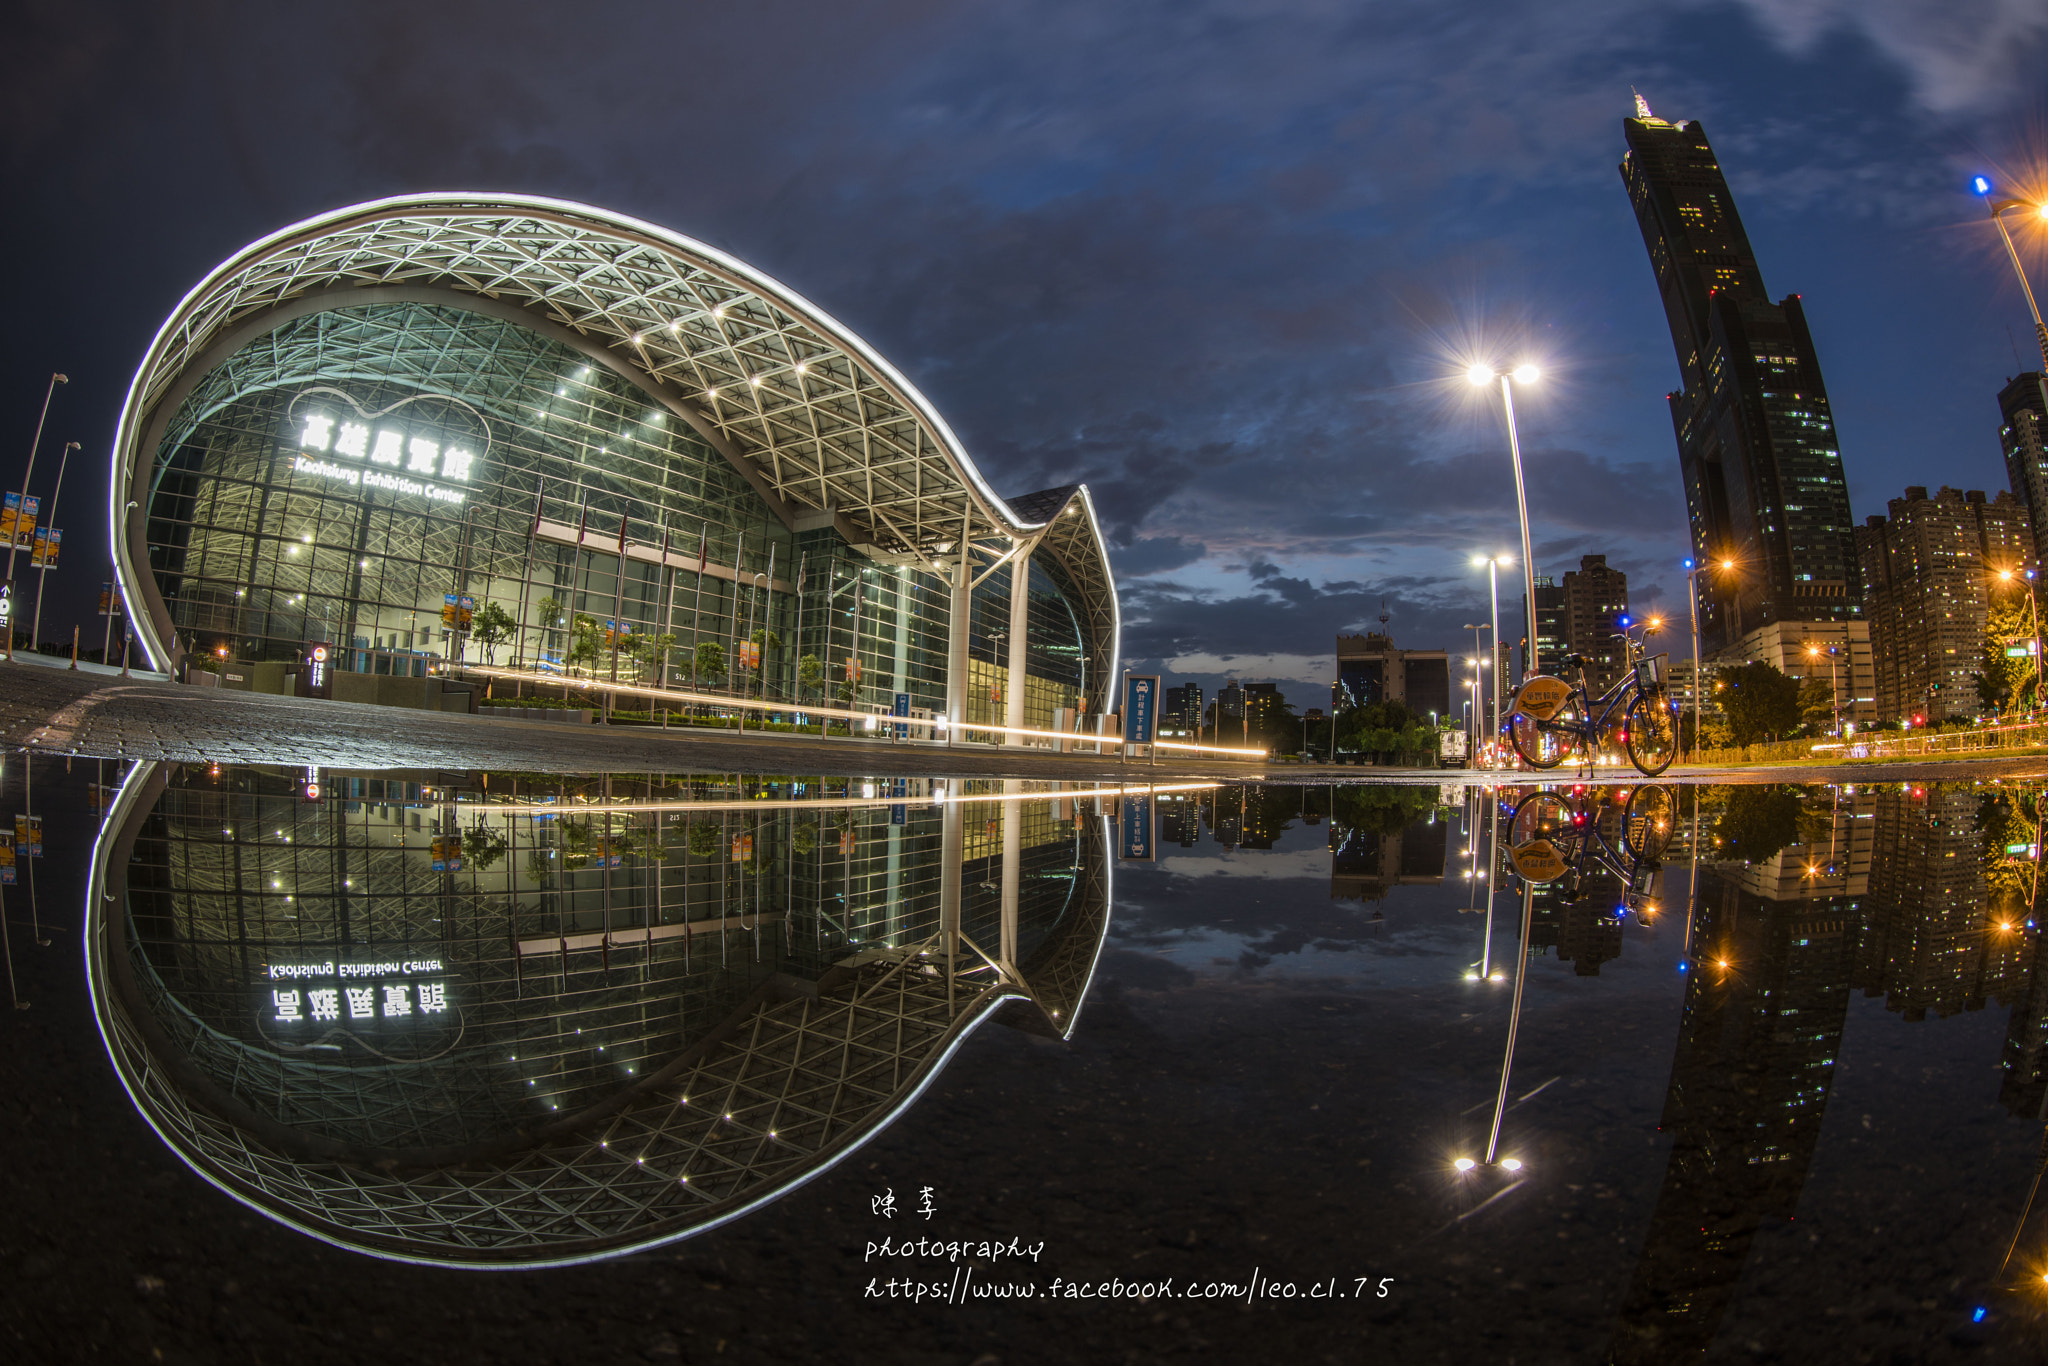 Sony a7R II sample photo. Kaohsiung exhibition center photography